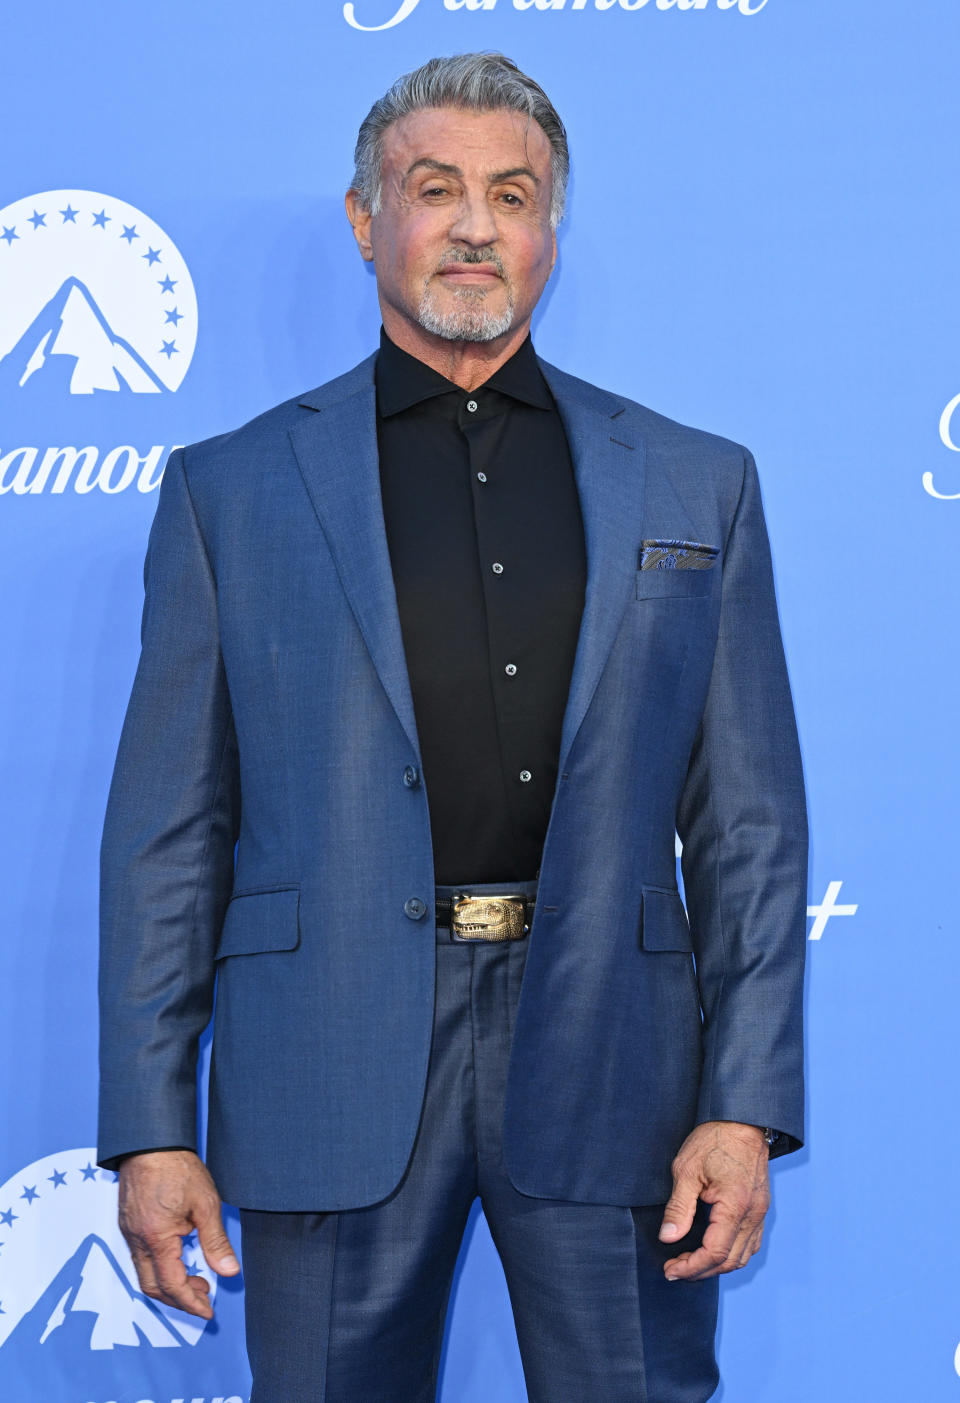 Sylvester Stallone attends the Paramount+ UK Launch